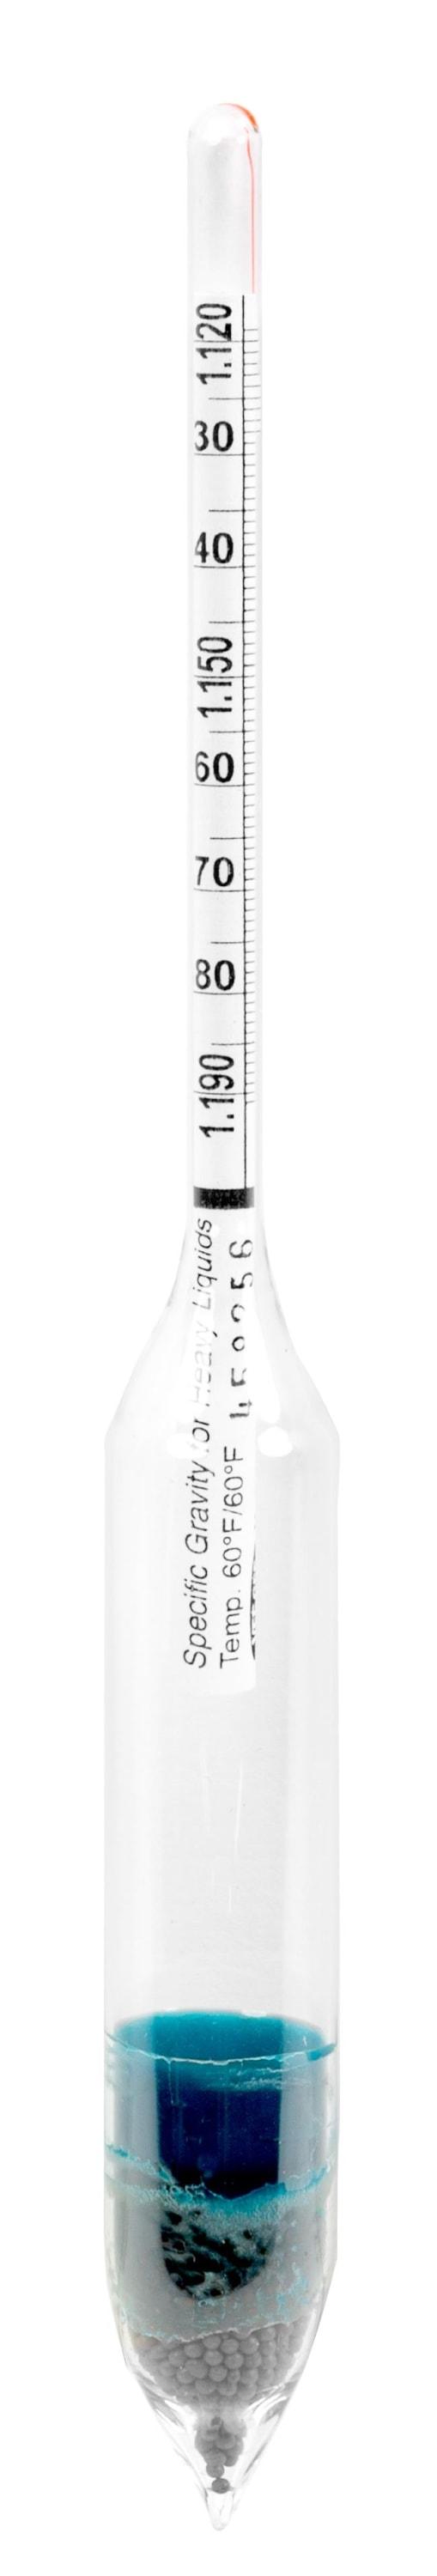 Precision Short Form Specific Gravity Hydrometers from VEE GEE Scientific